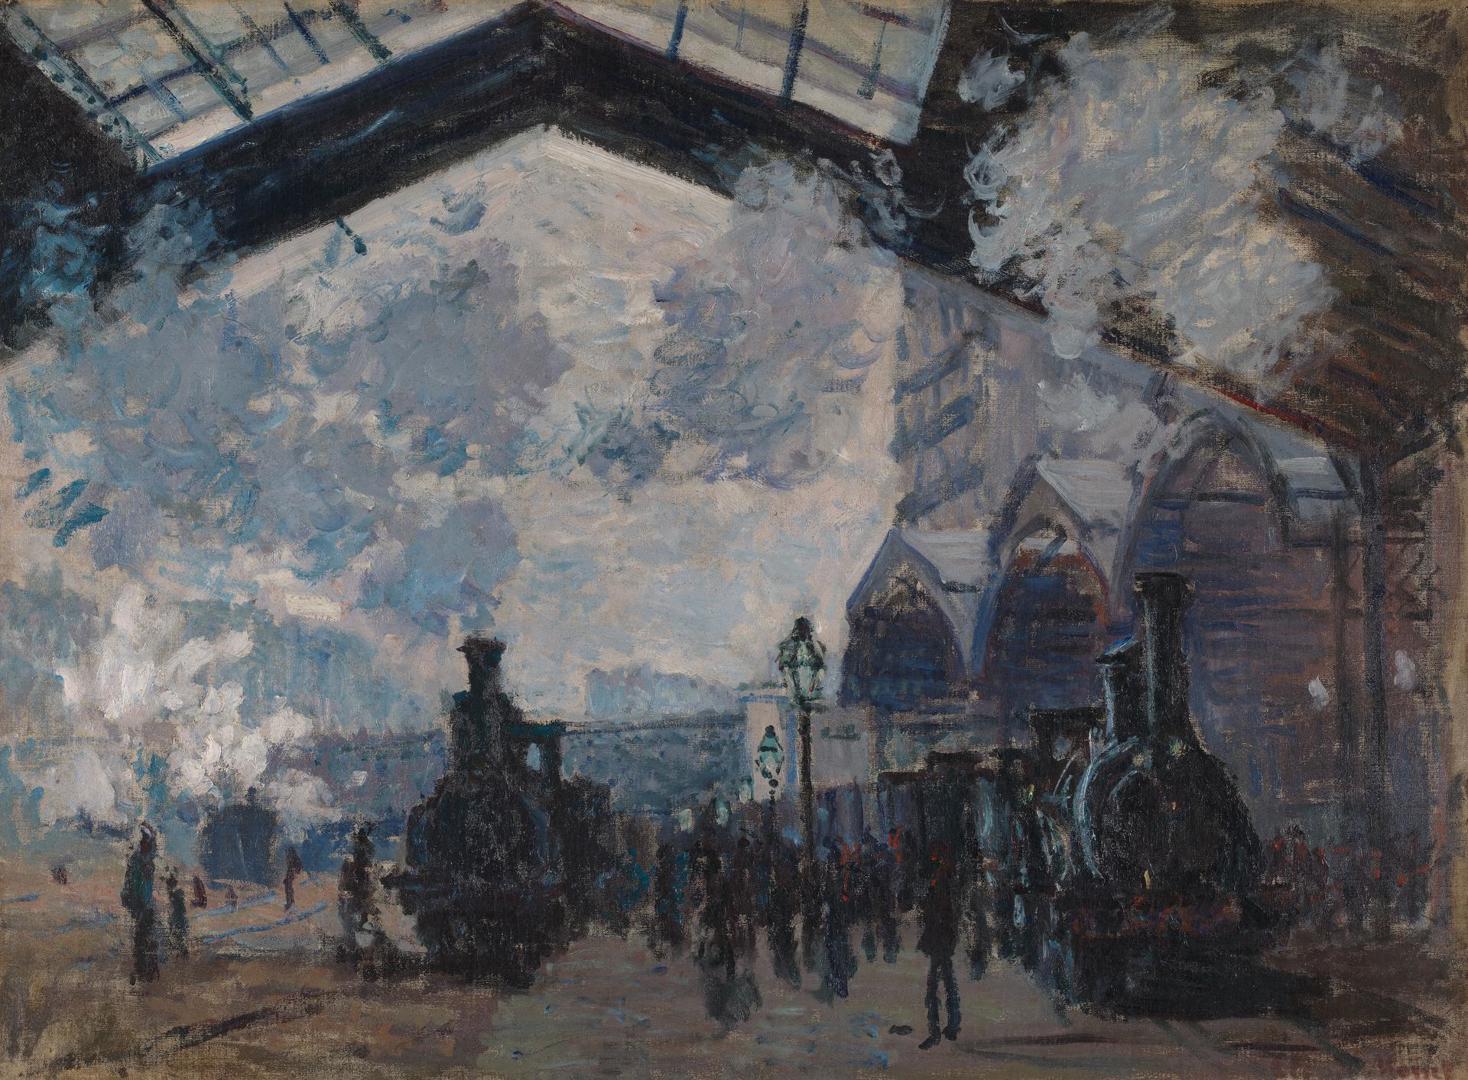 The Gare St-Lazare by Claude Monet